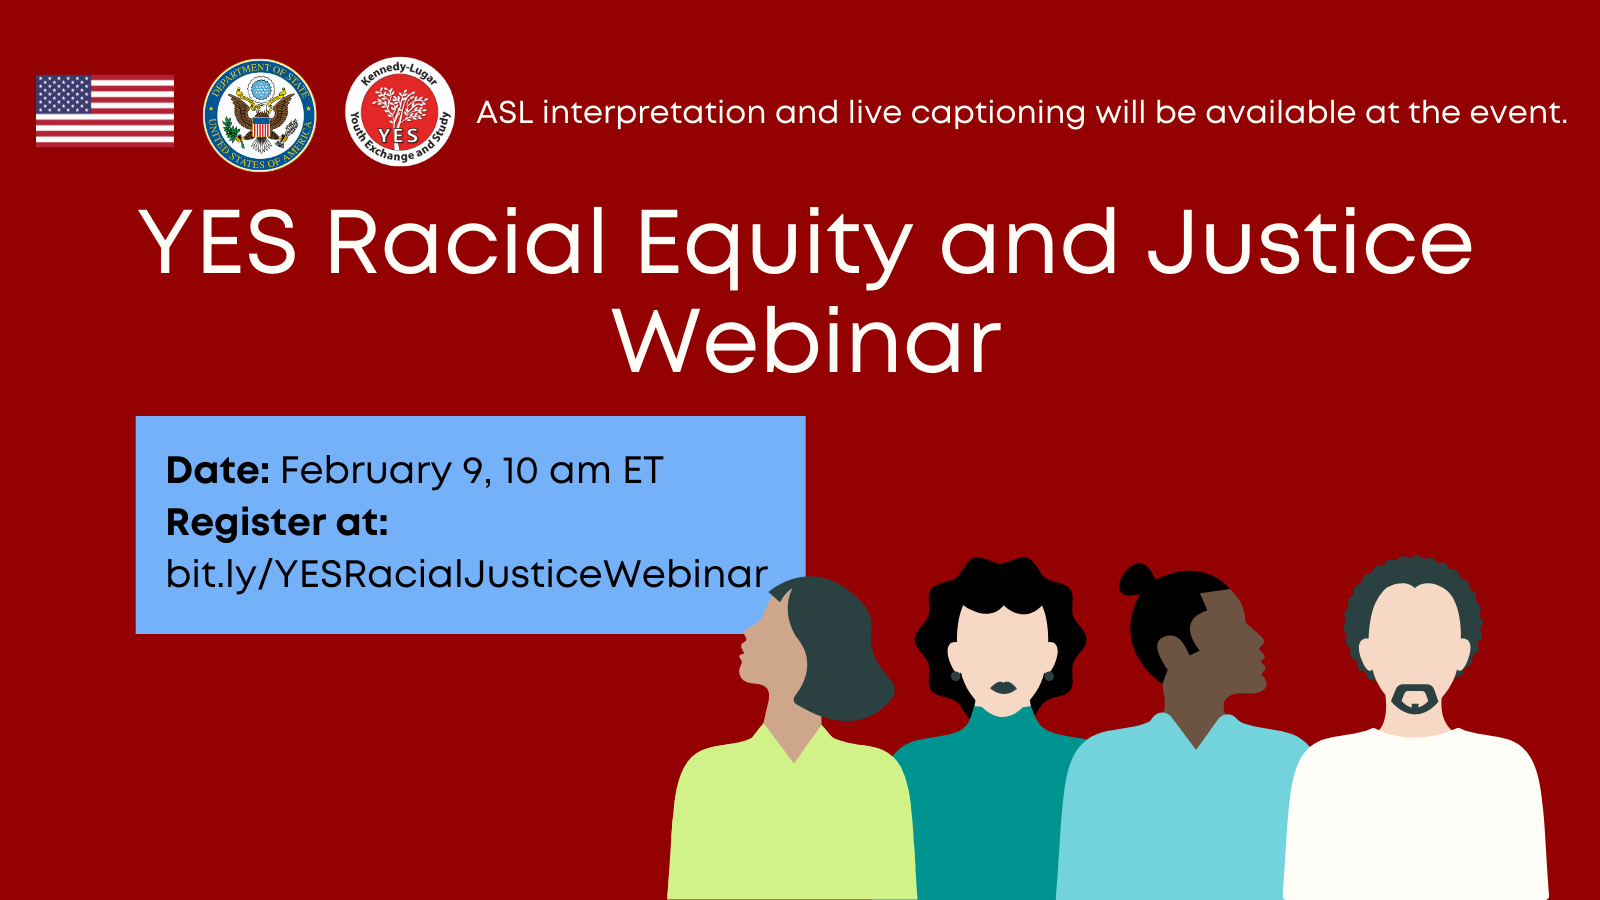 Yes Racial Justice Webinar Website And Twitter